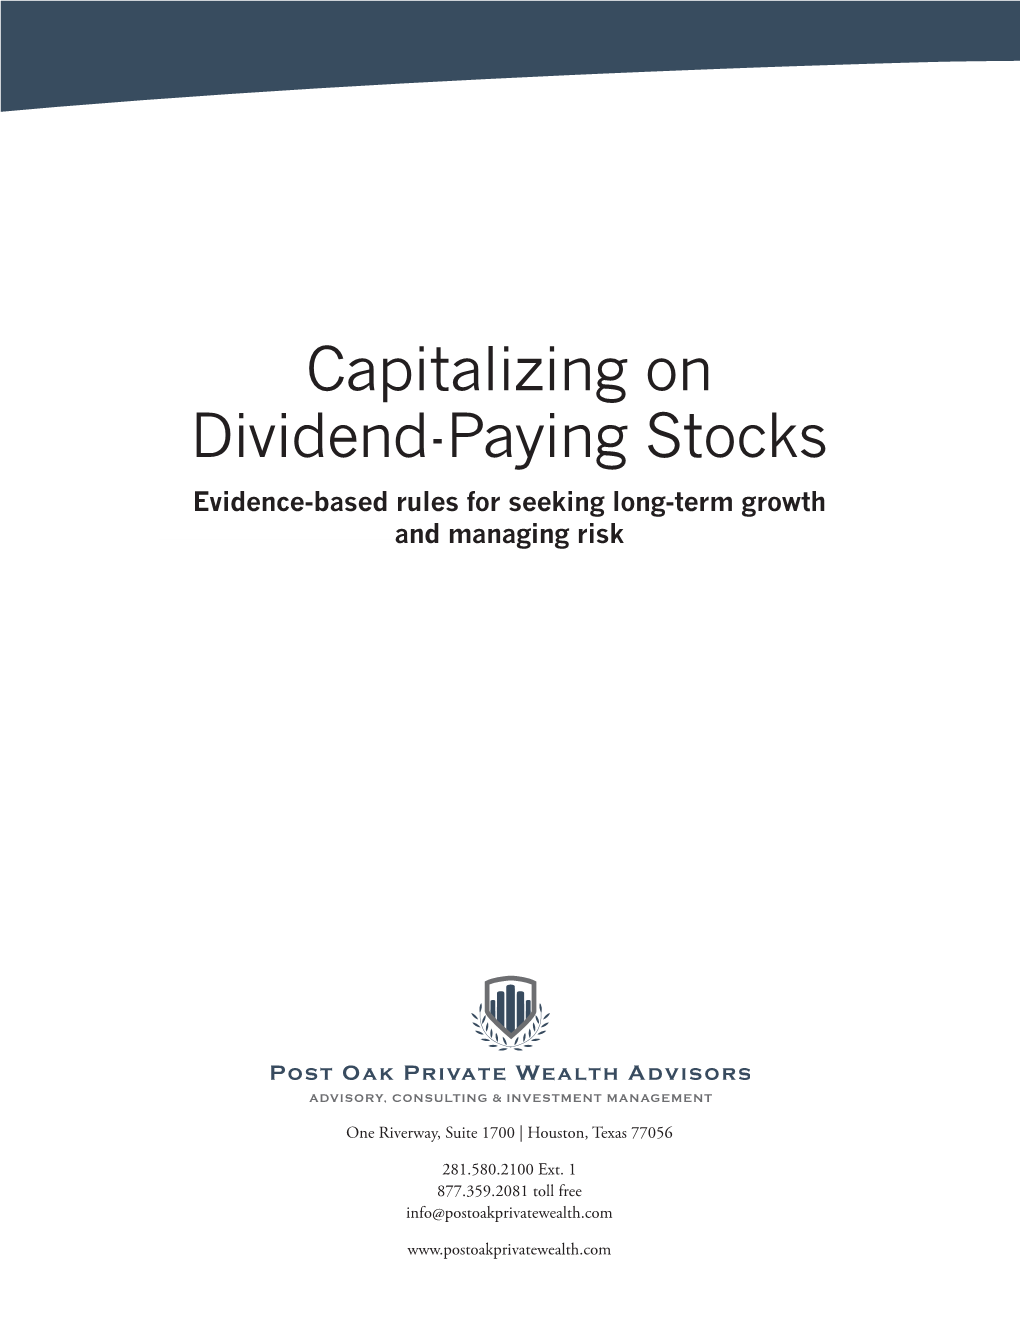 Capitalizing on Dividend-Paying Stocks Evidence-Based Rules for Seeking Long-Term Growth and Managing Risk